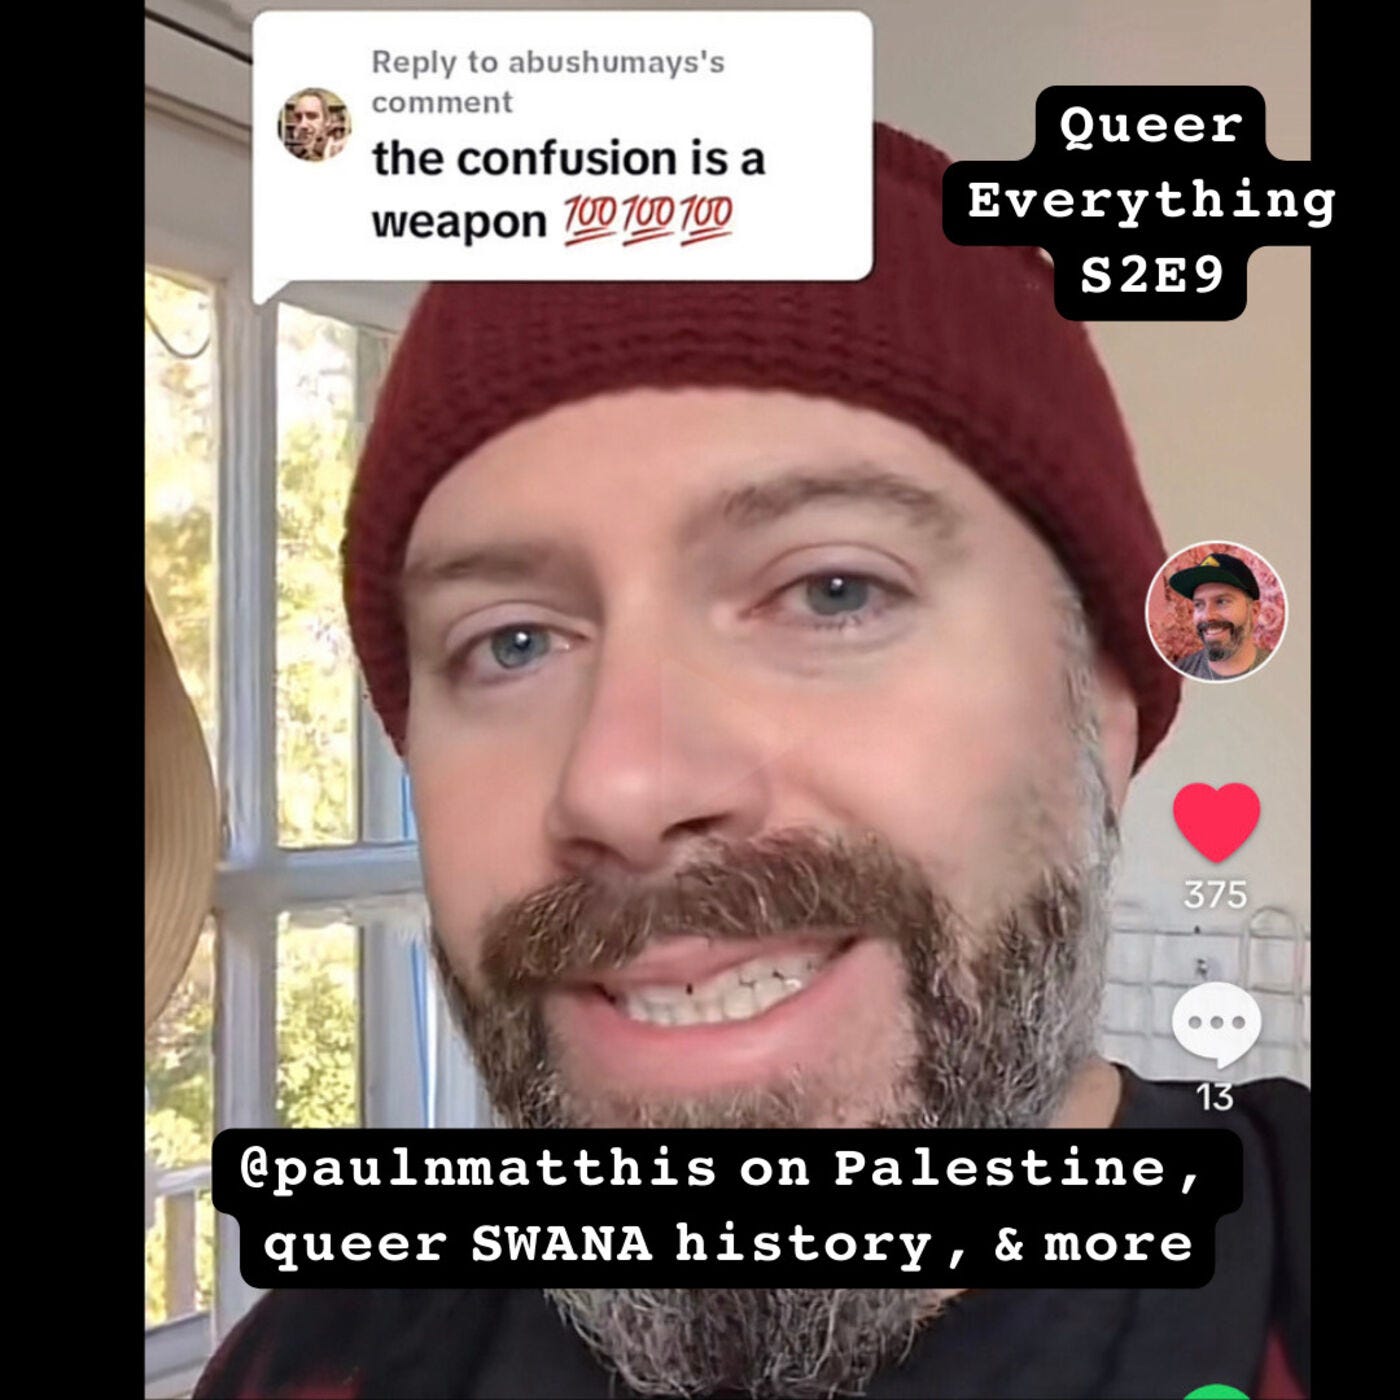 Online educator @paulnmatthis on Palestine, queer SWANA history, & more (double episode)